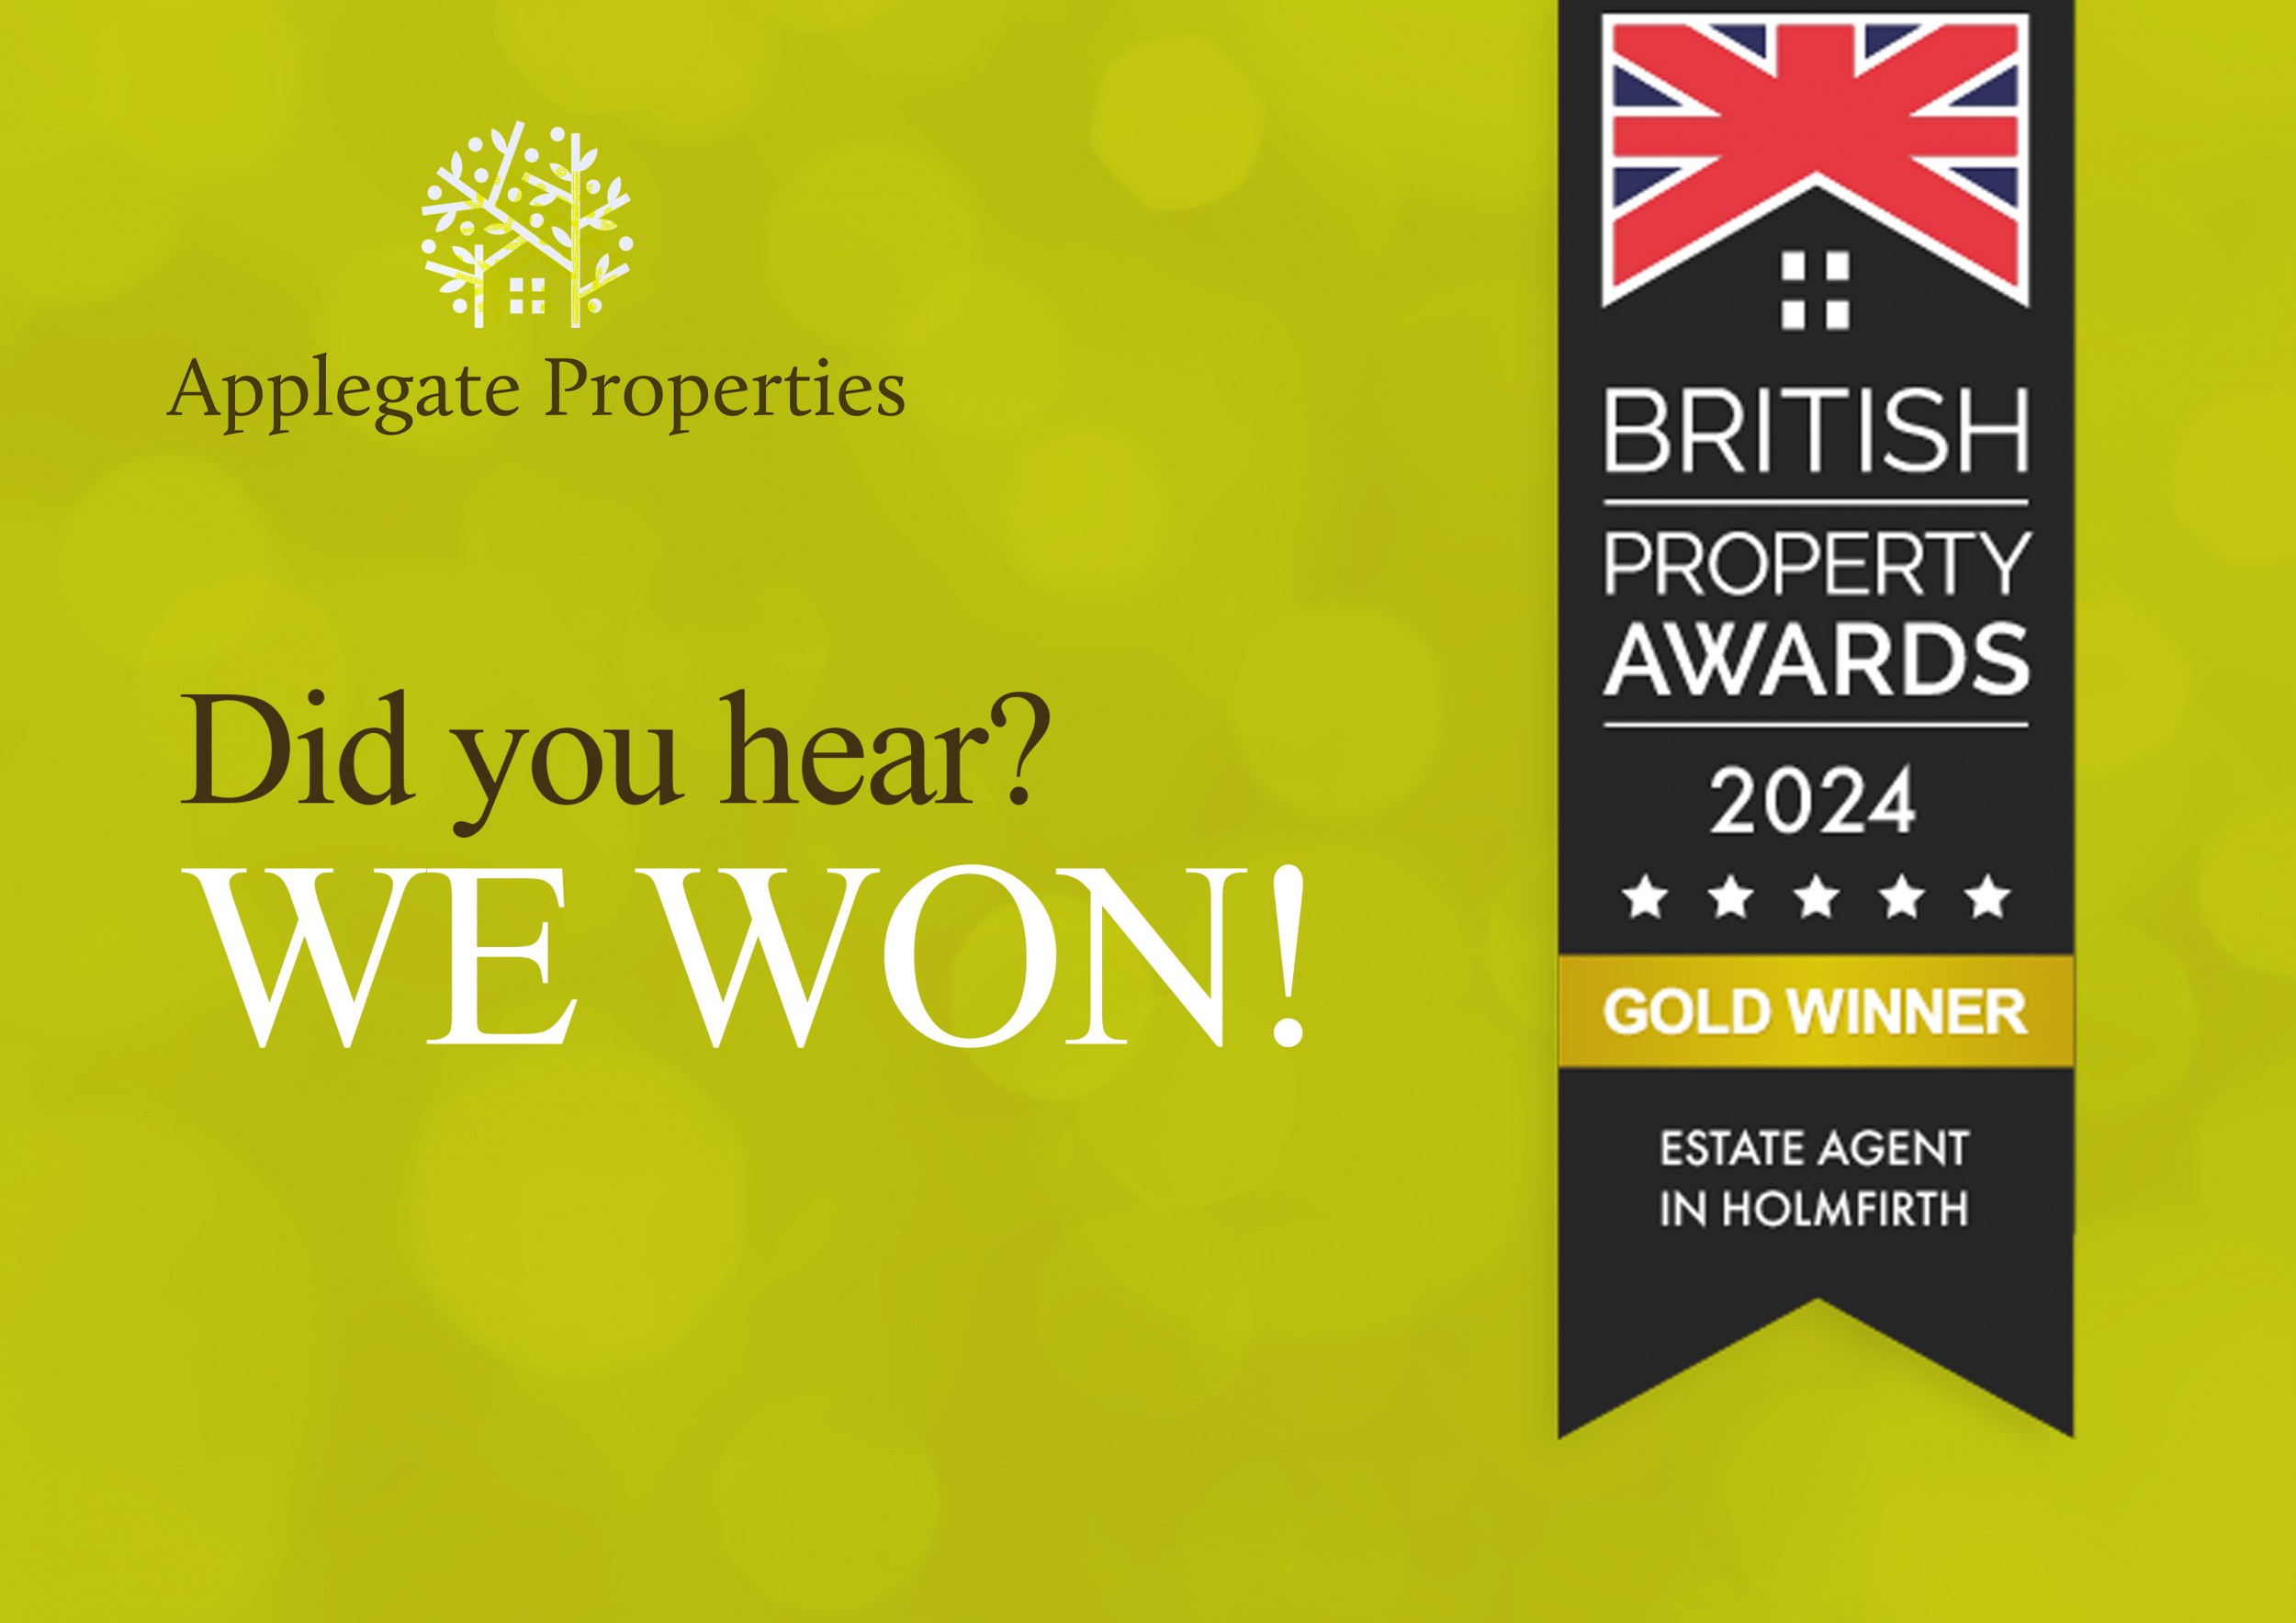 Applegate Properties named Holmfirth’s leading estate agent for the second year running